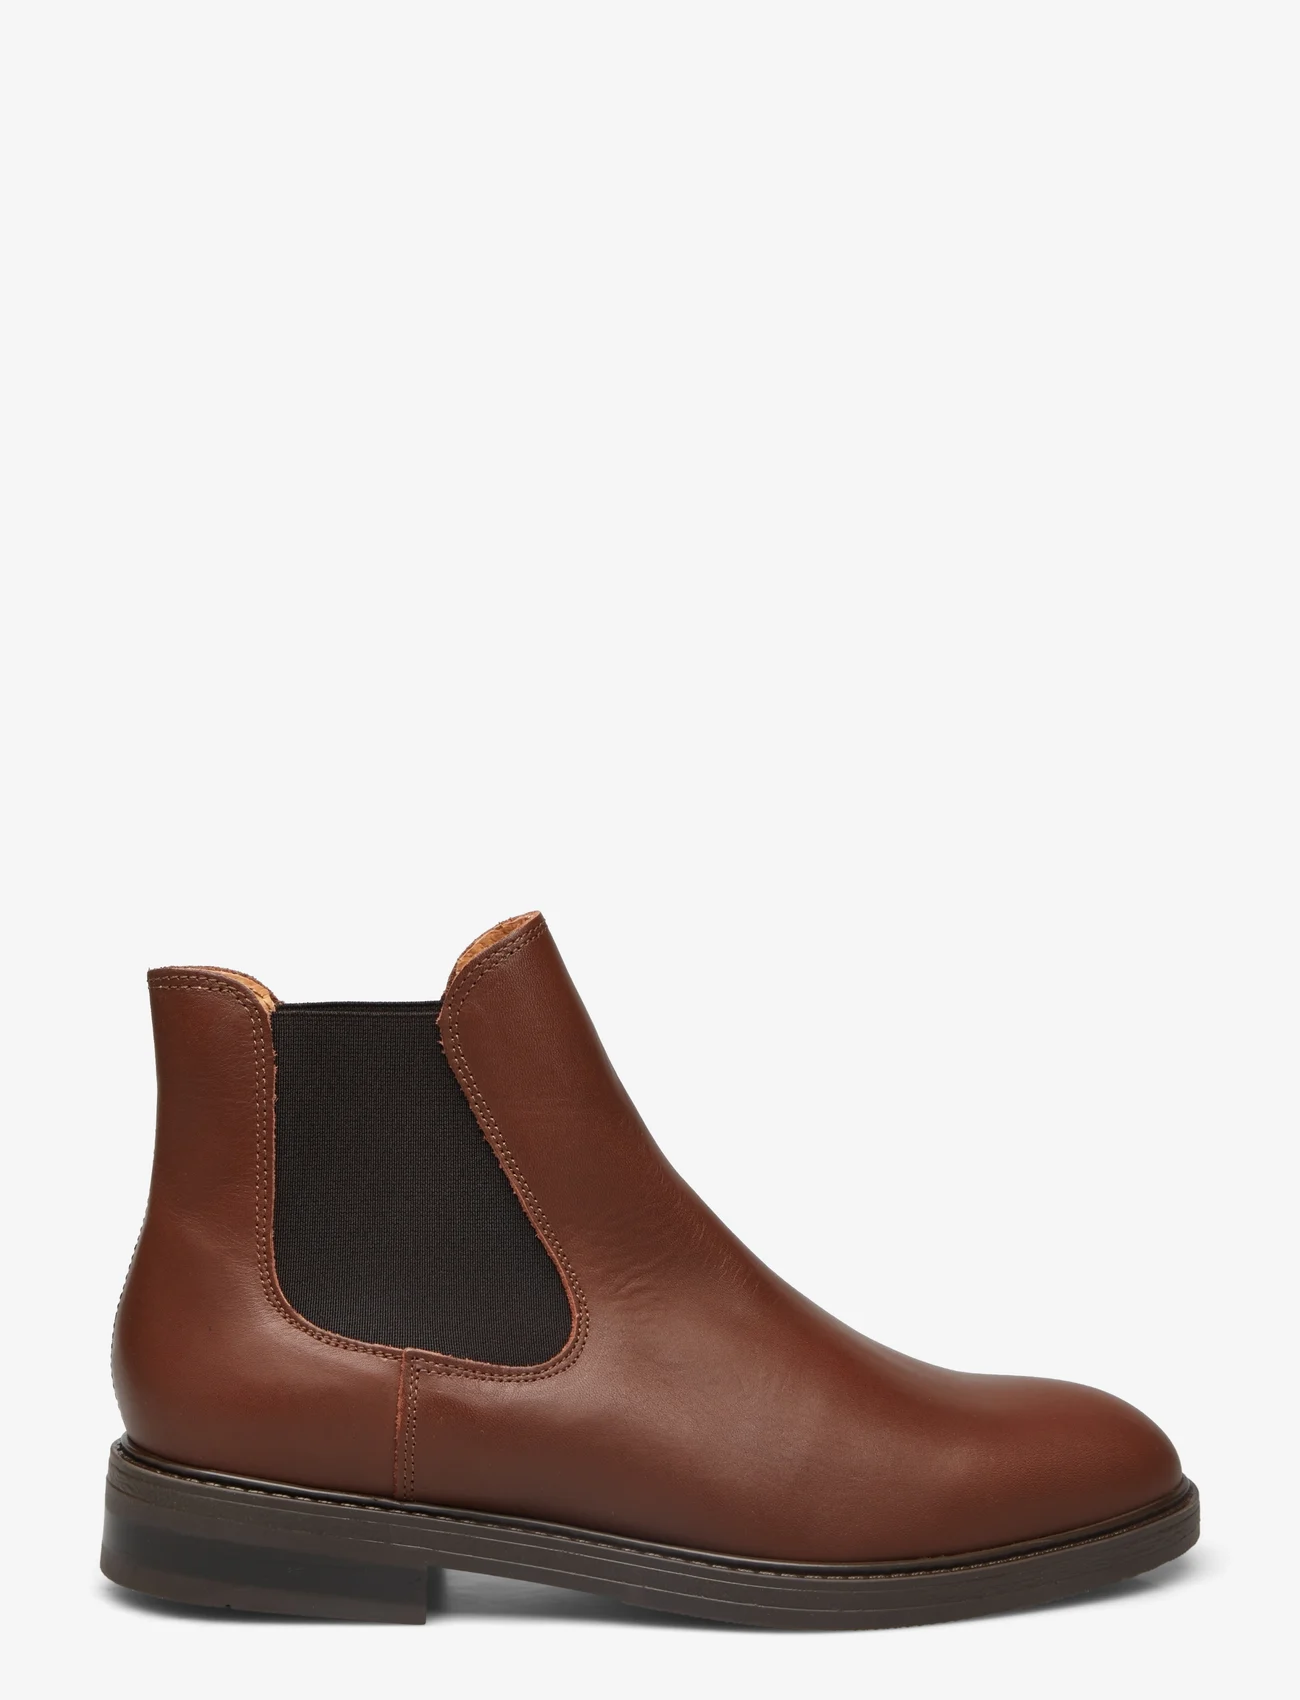 Selected Homme - SLHBLAKE LEATHER CHELSEA BOOT NOOS - birthday gifts - demitasse - 1